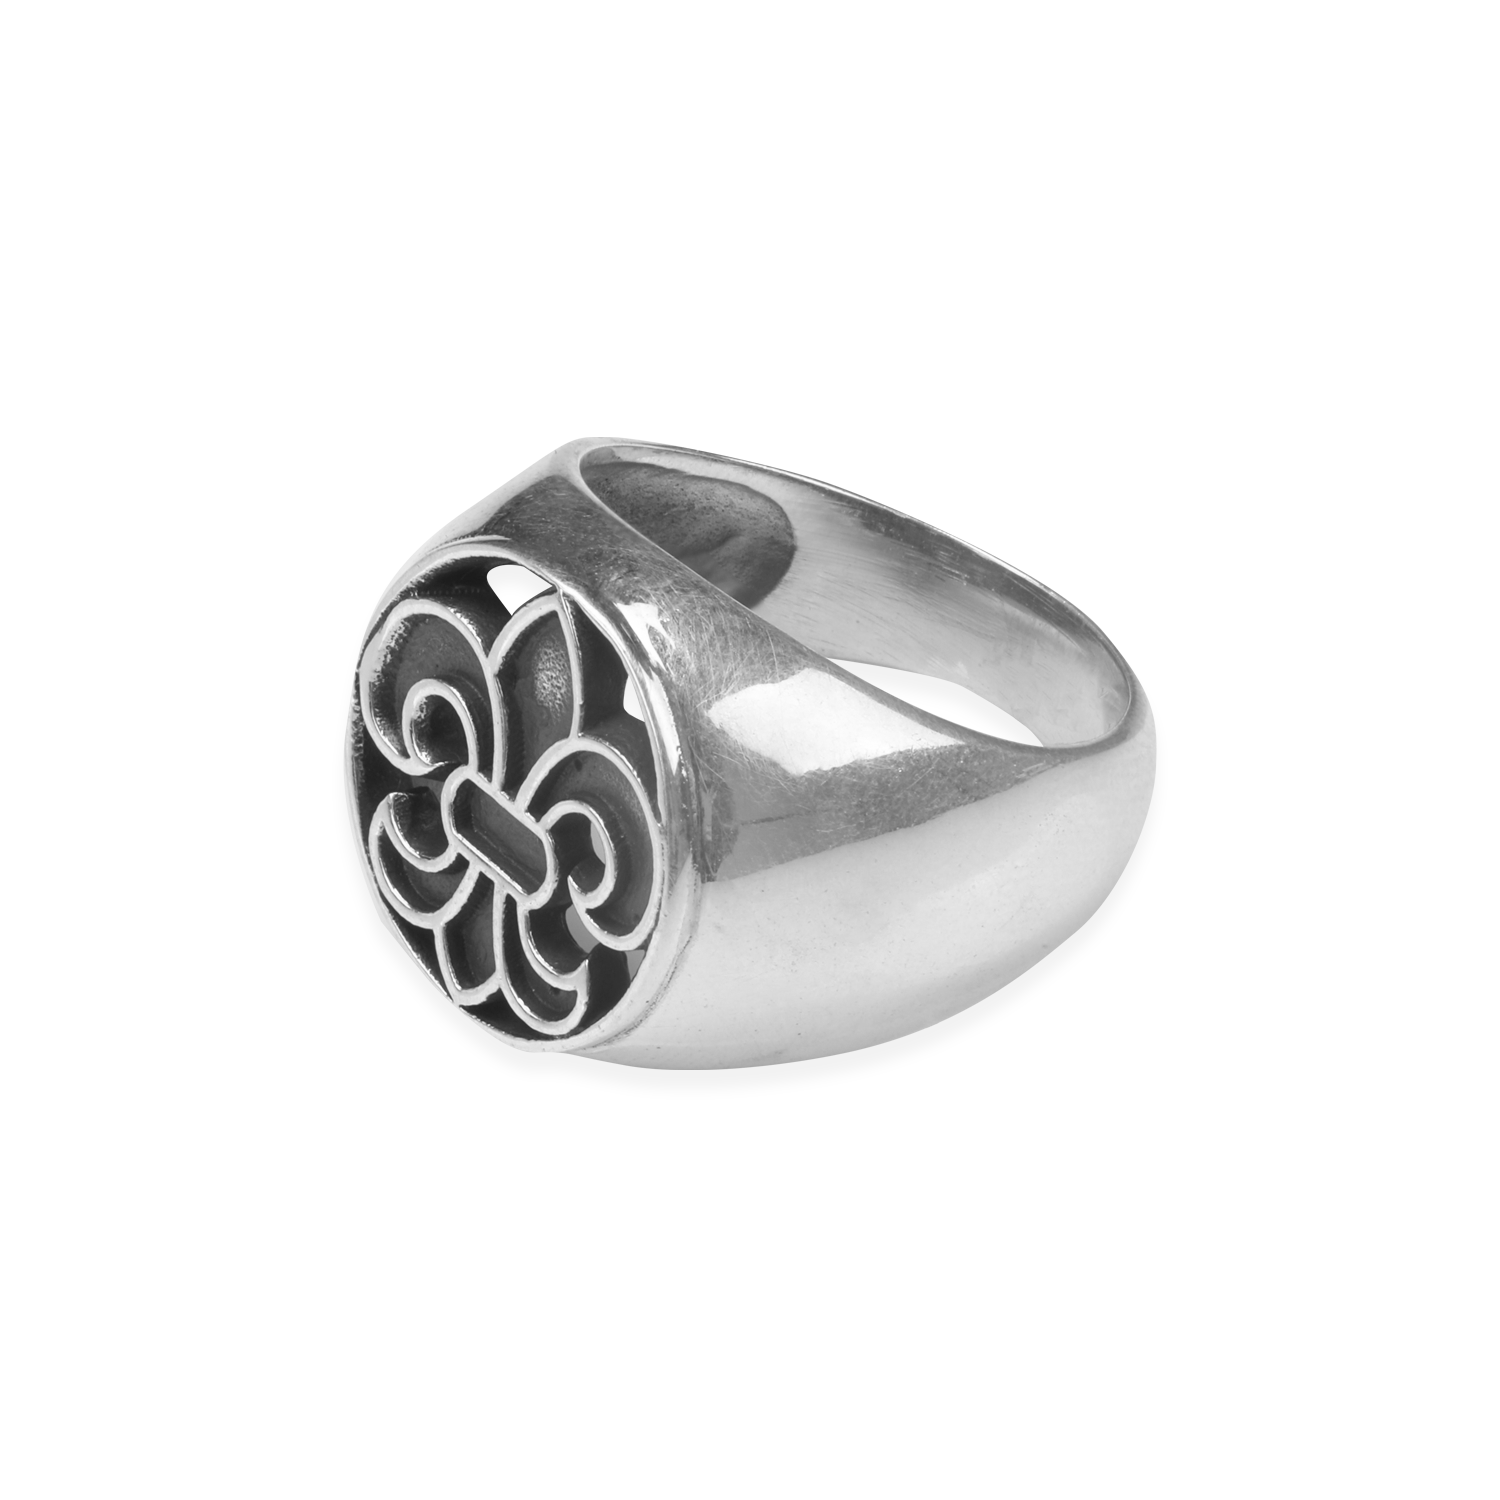 Ancient Warrior: Oxidized Silver Men's Ring | SKU: 0018200119